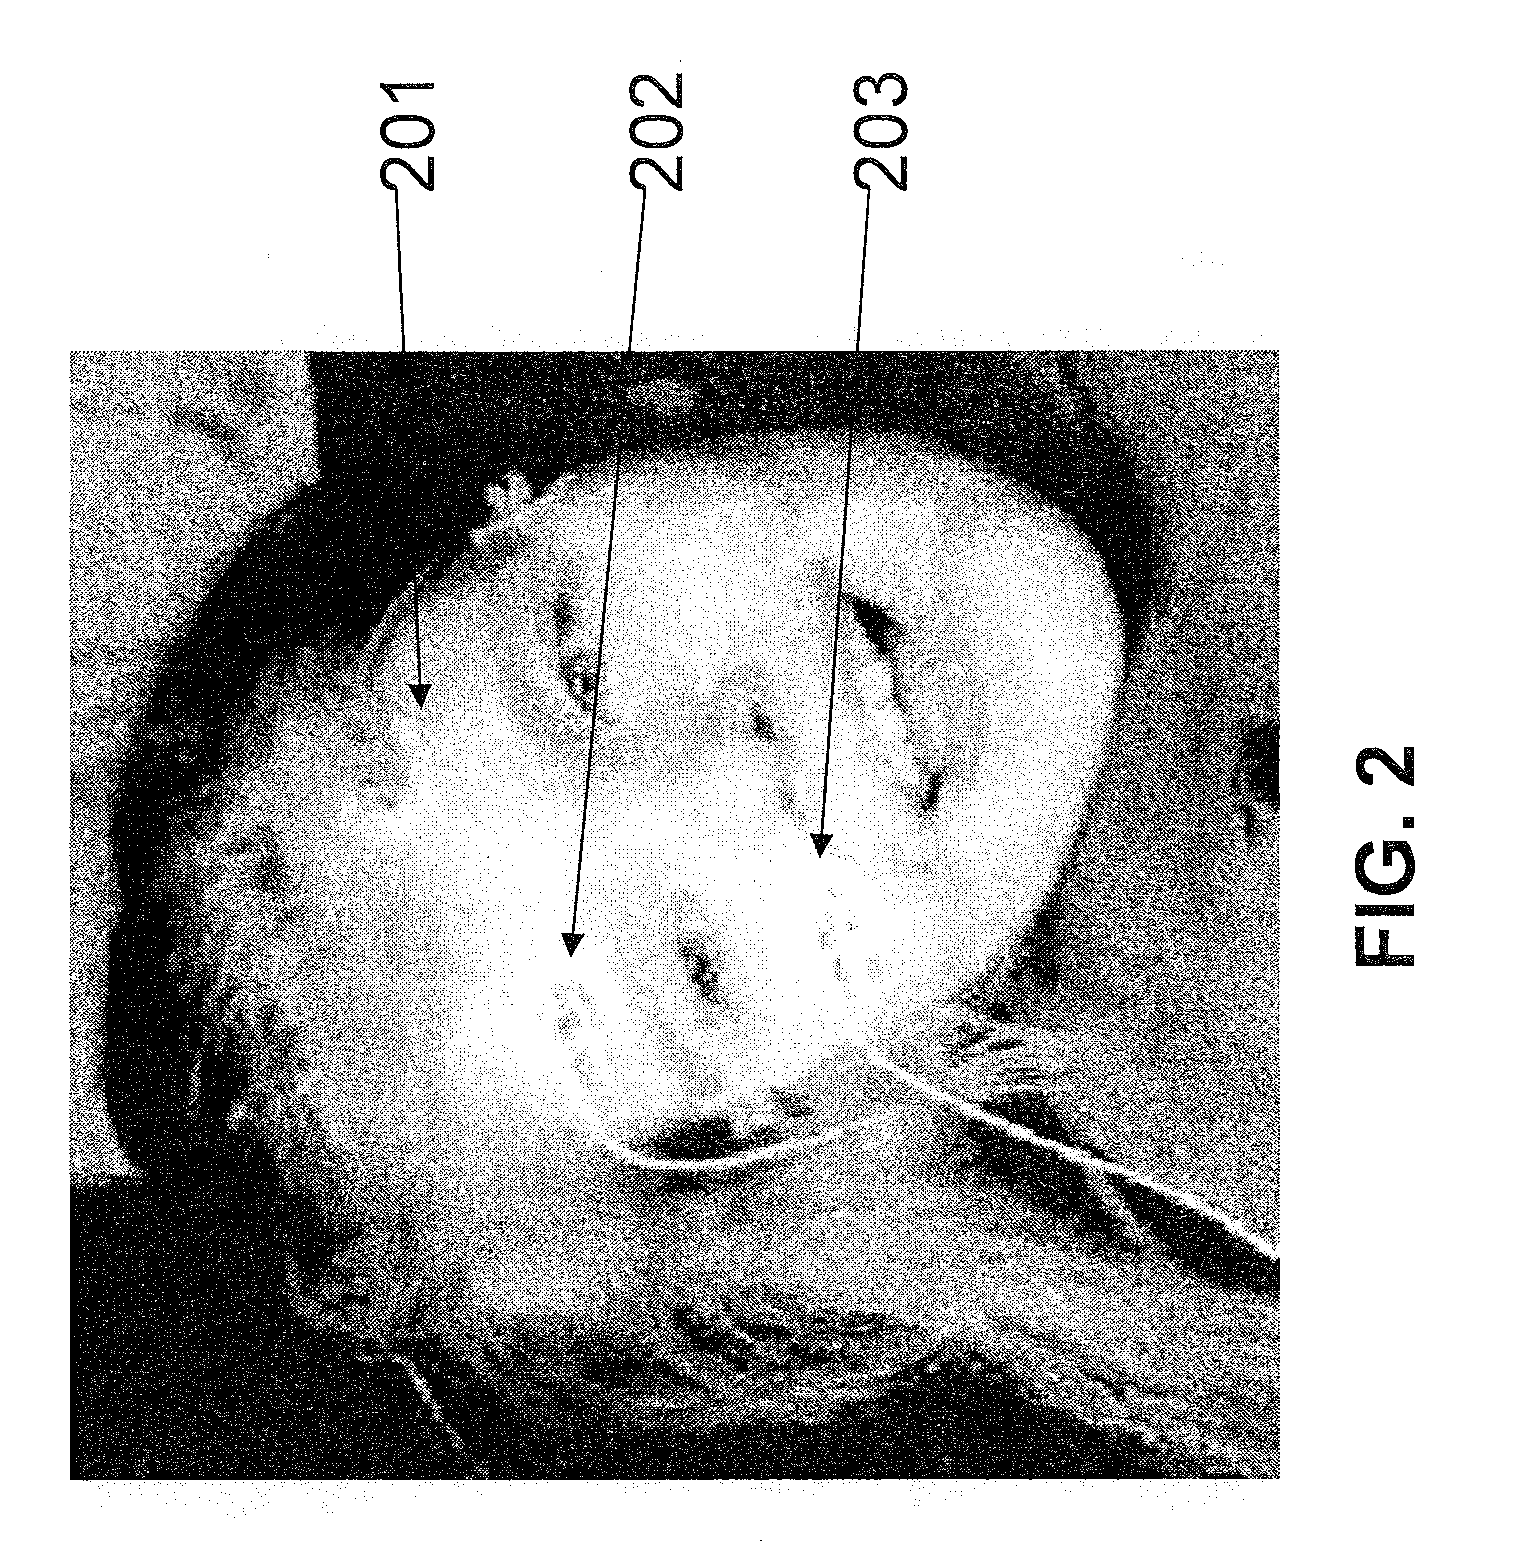 Eye tracking system and method